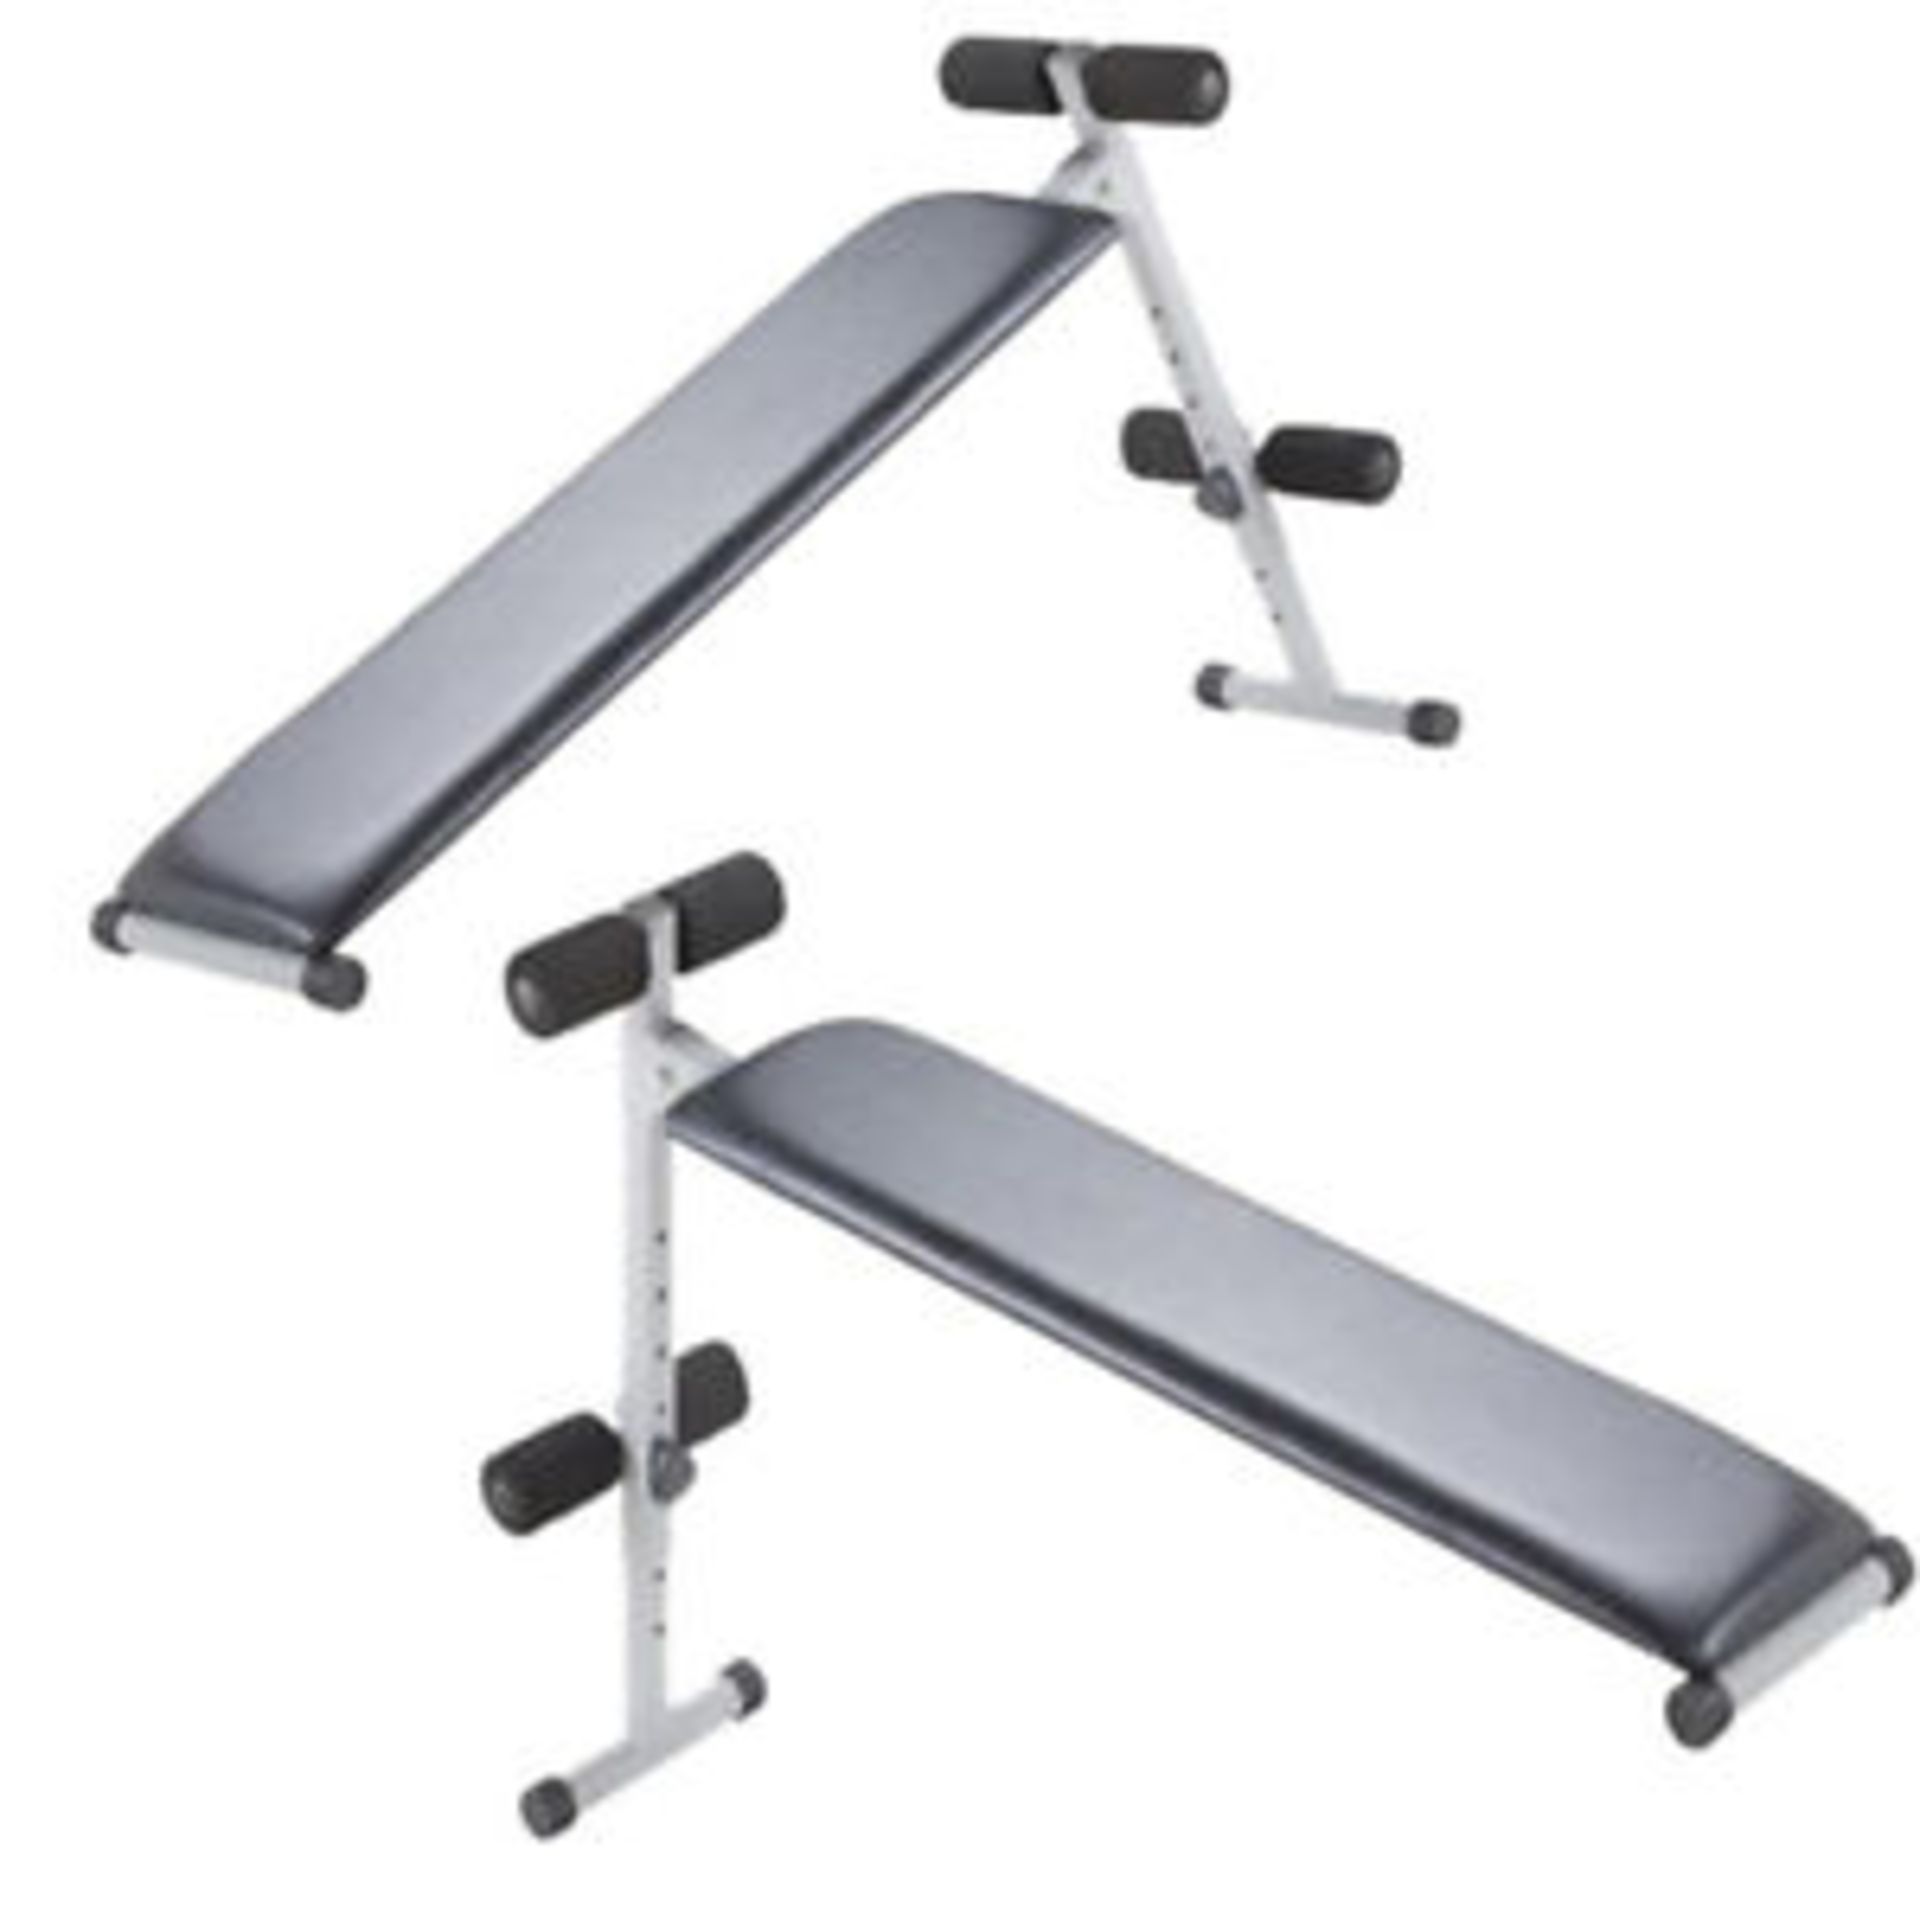 V Brand New 2 in 1 Incline/Sit Up Bench - Tesco Price £35.00 - Image 4 of 6